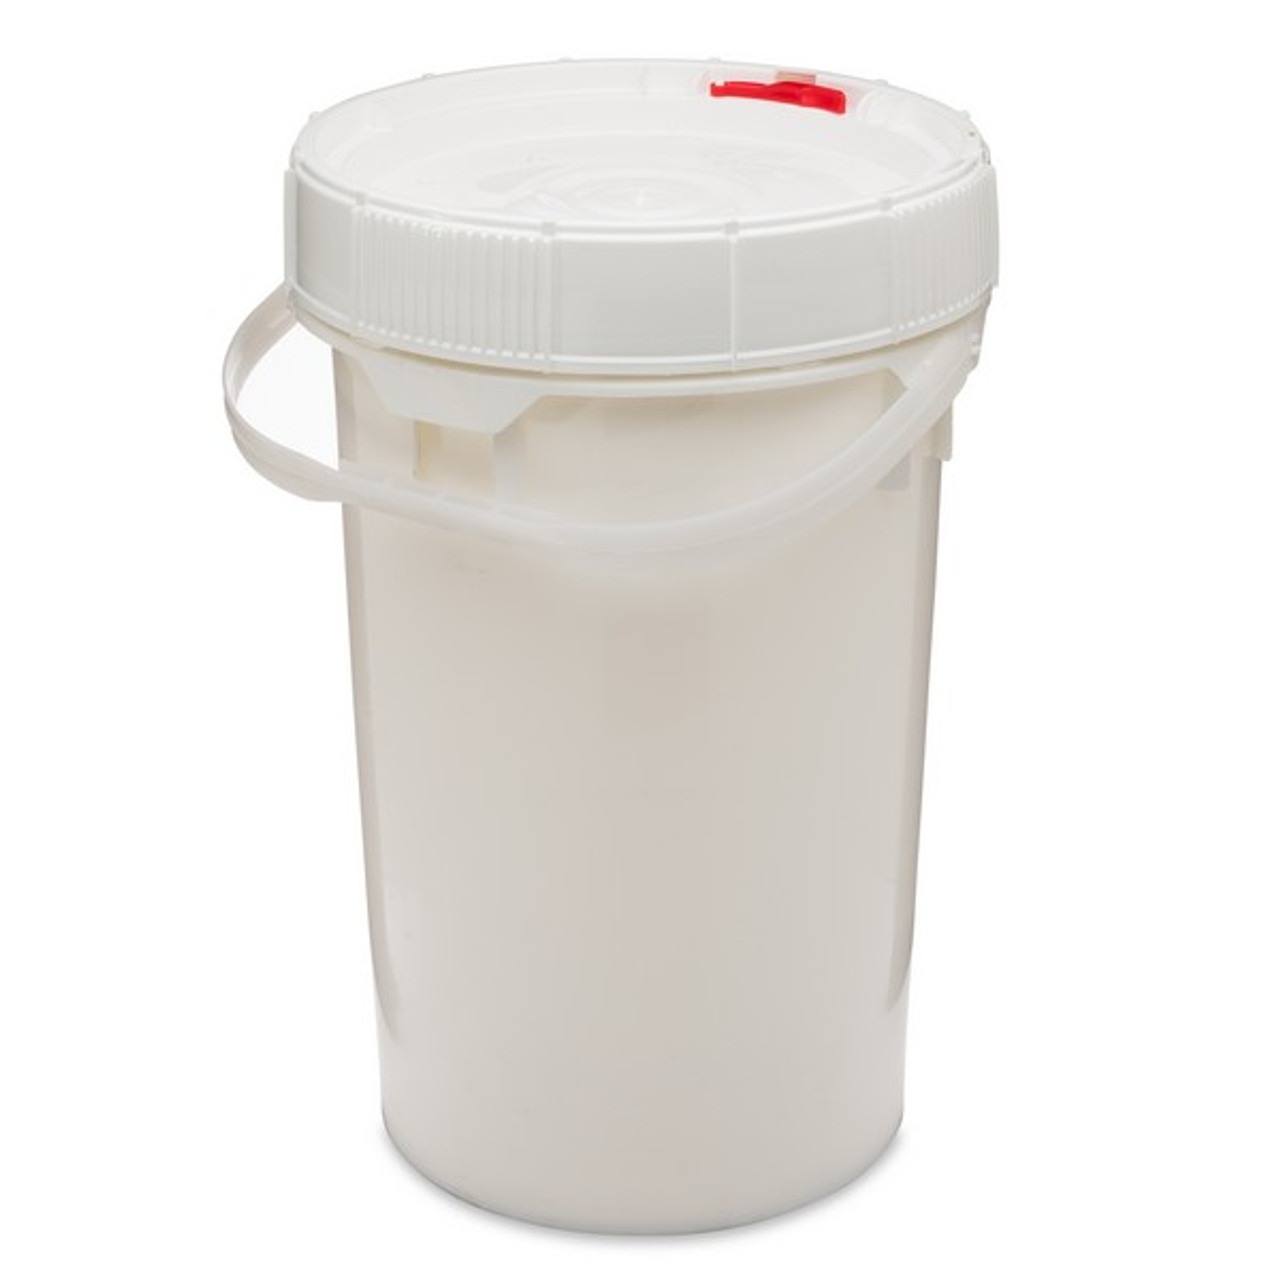 6.5 gal White HDPE UN Rated Pails (Screw Top Lid)